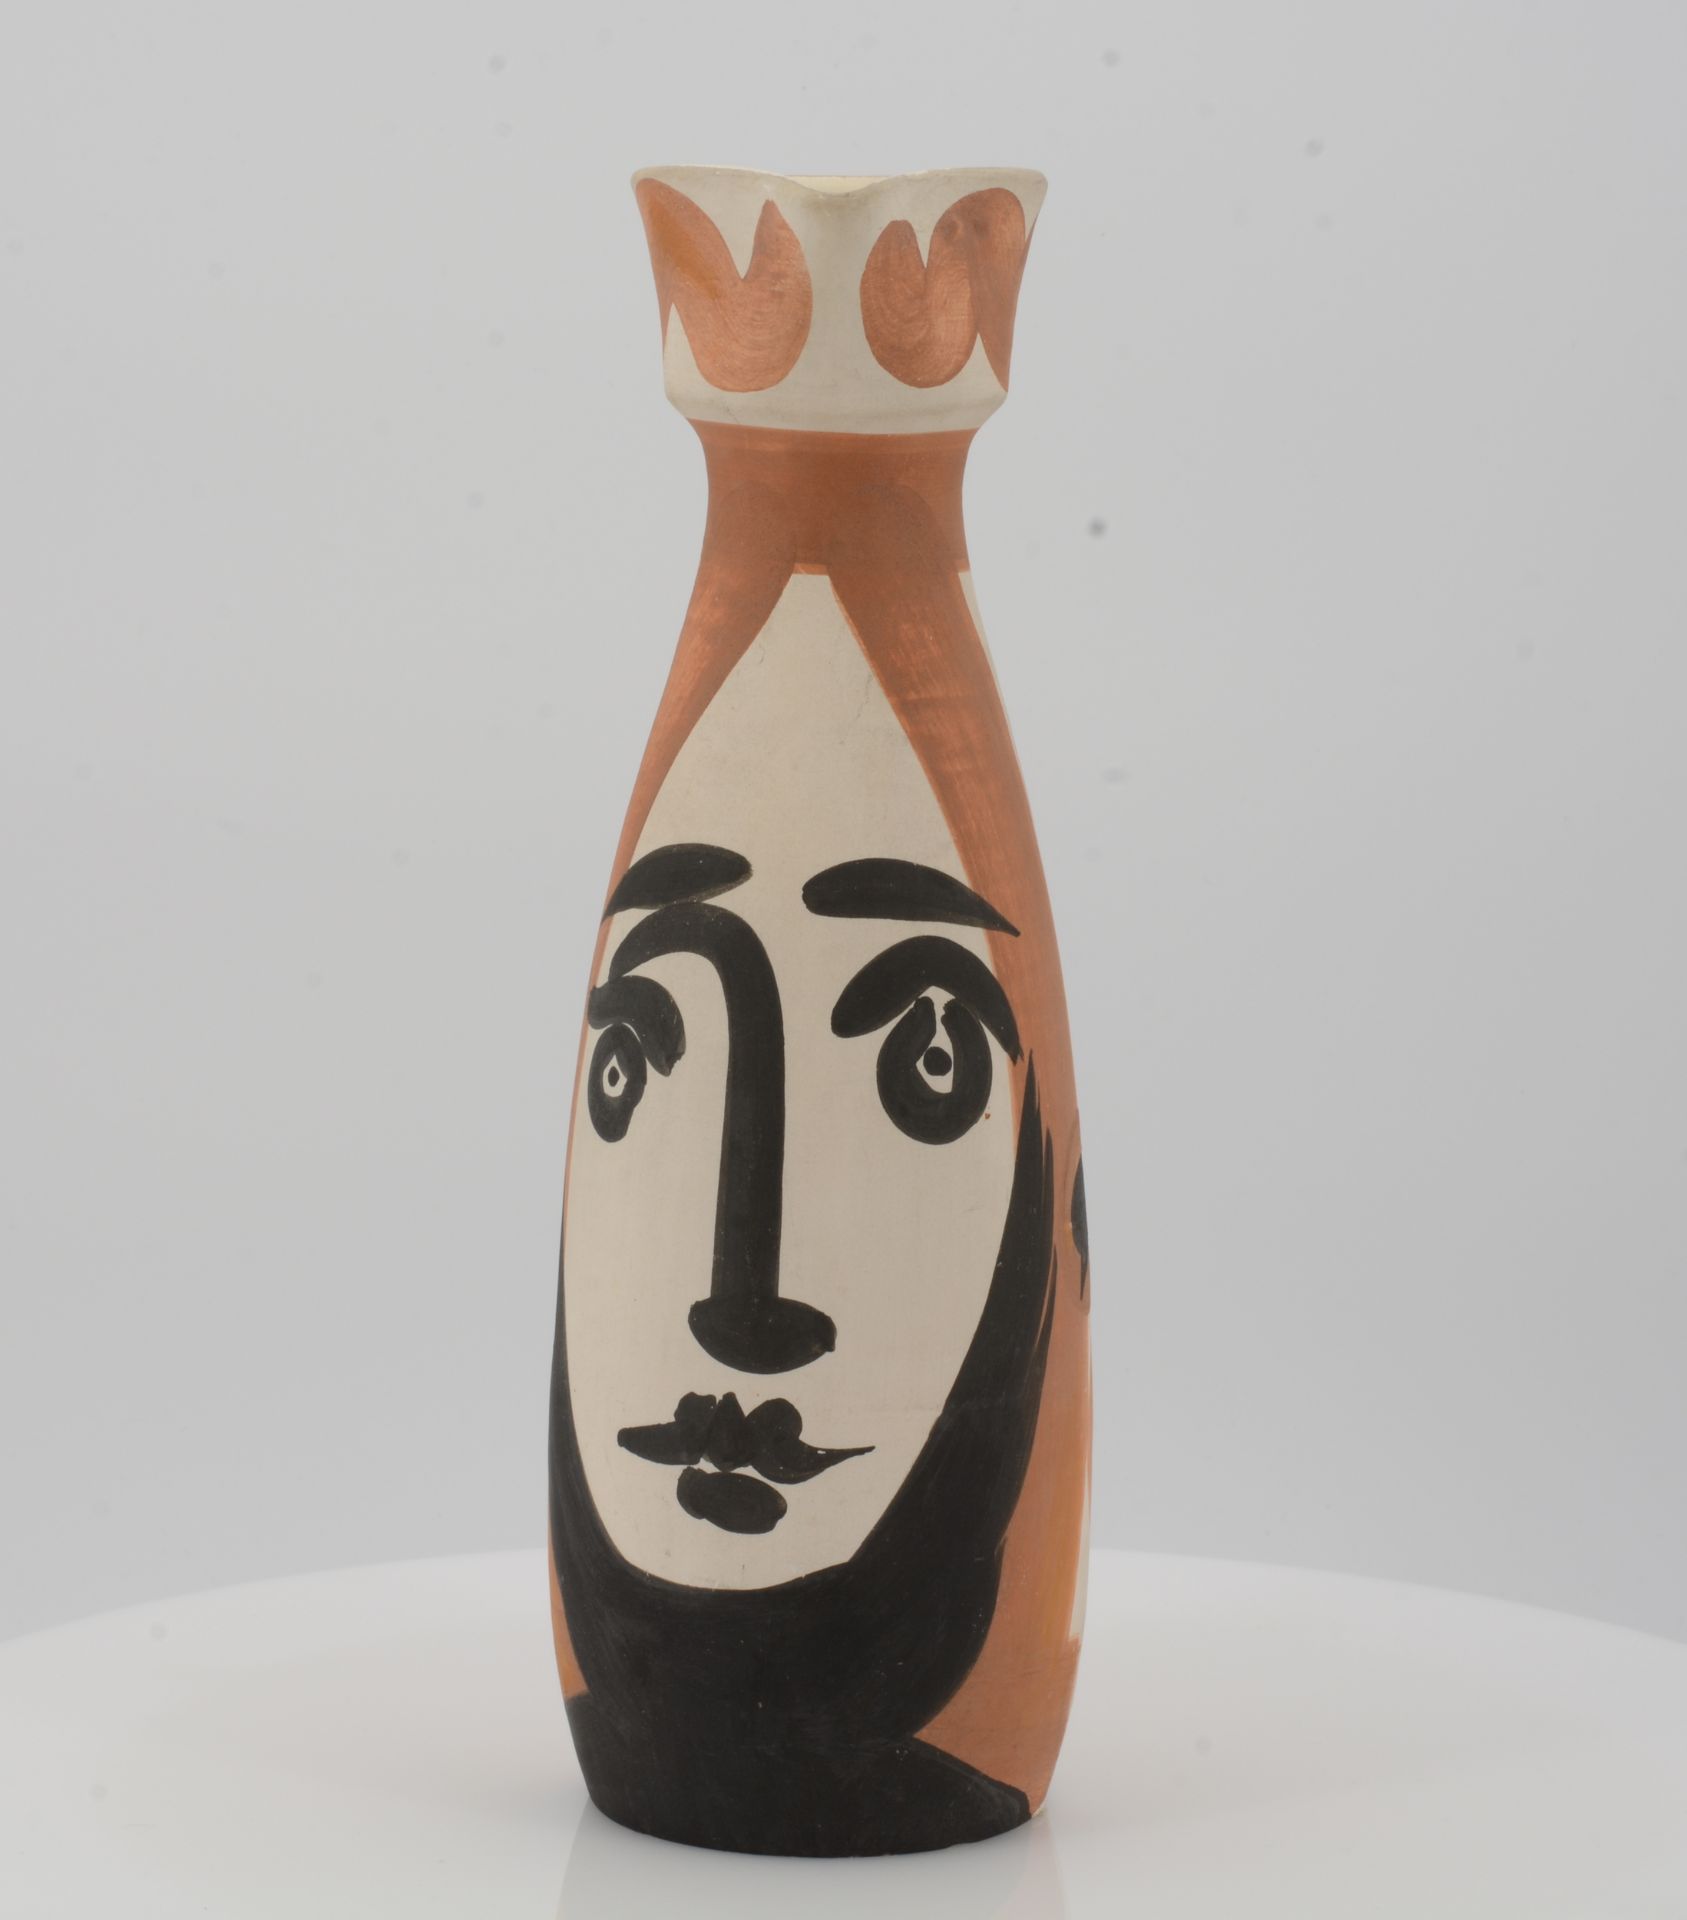 Picasso, Pablo1881 Malaga - 1973 MouginsFace. 1955. White earthenware clay, polychromed and glazed - Image 4 of 9